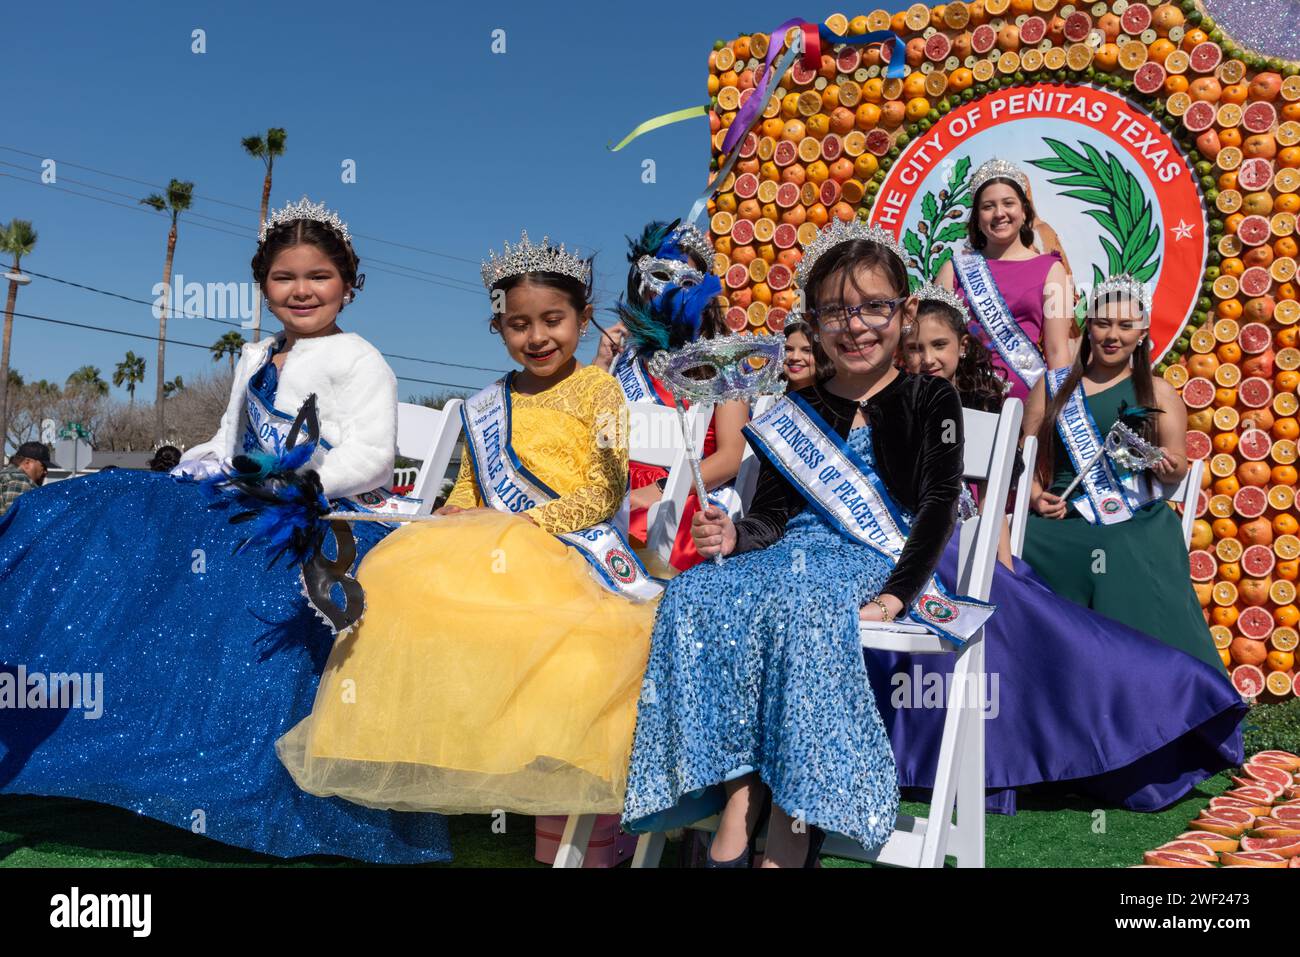 Colorful float from city of Penitas, Texas, with Miss Penitas and her court in 92nd Annual Texas Citrus Fiesta Parade of Oranges, Mission, TX, USA. Stock Photo